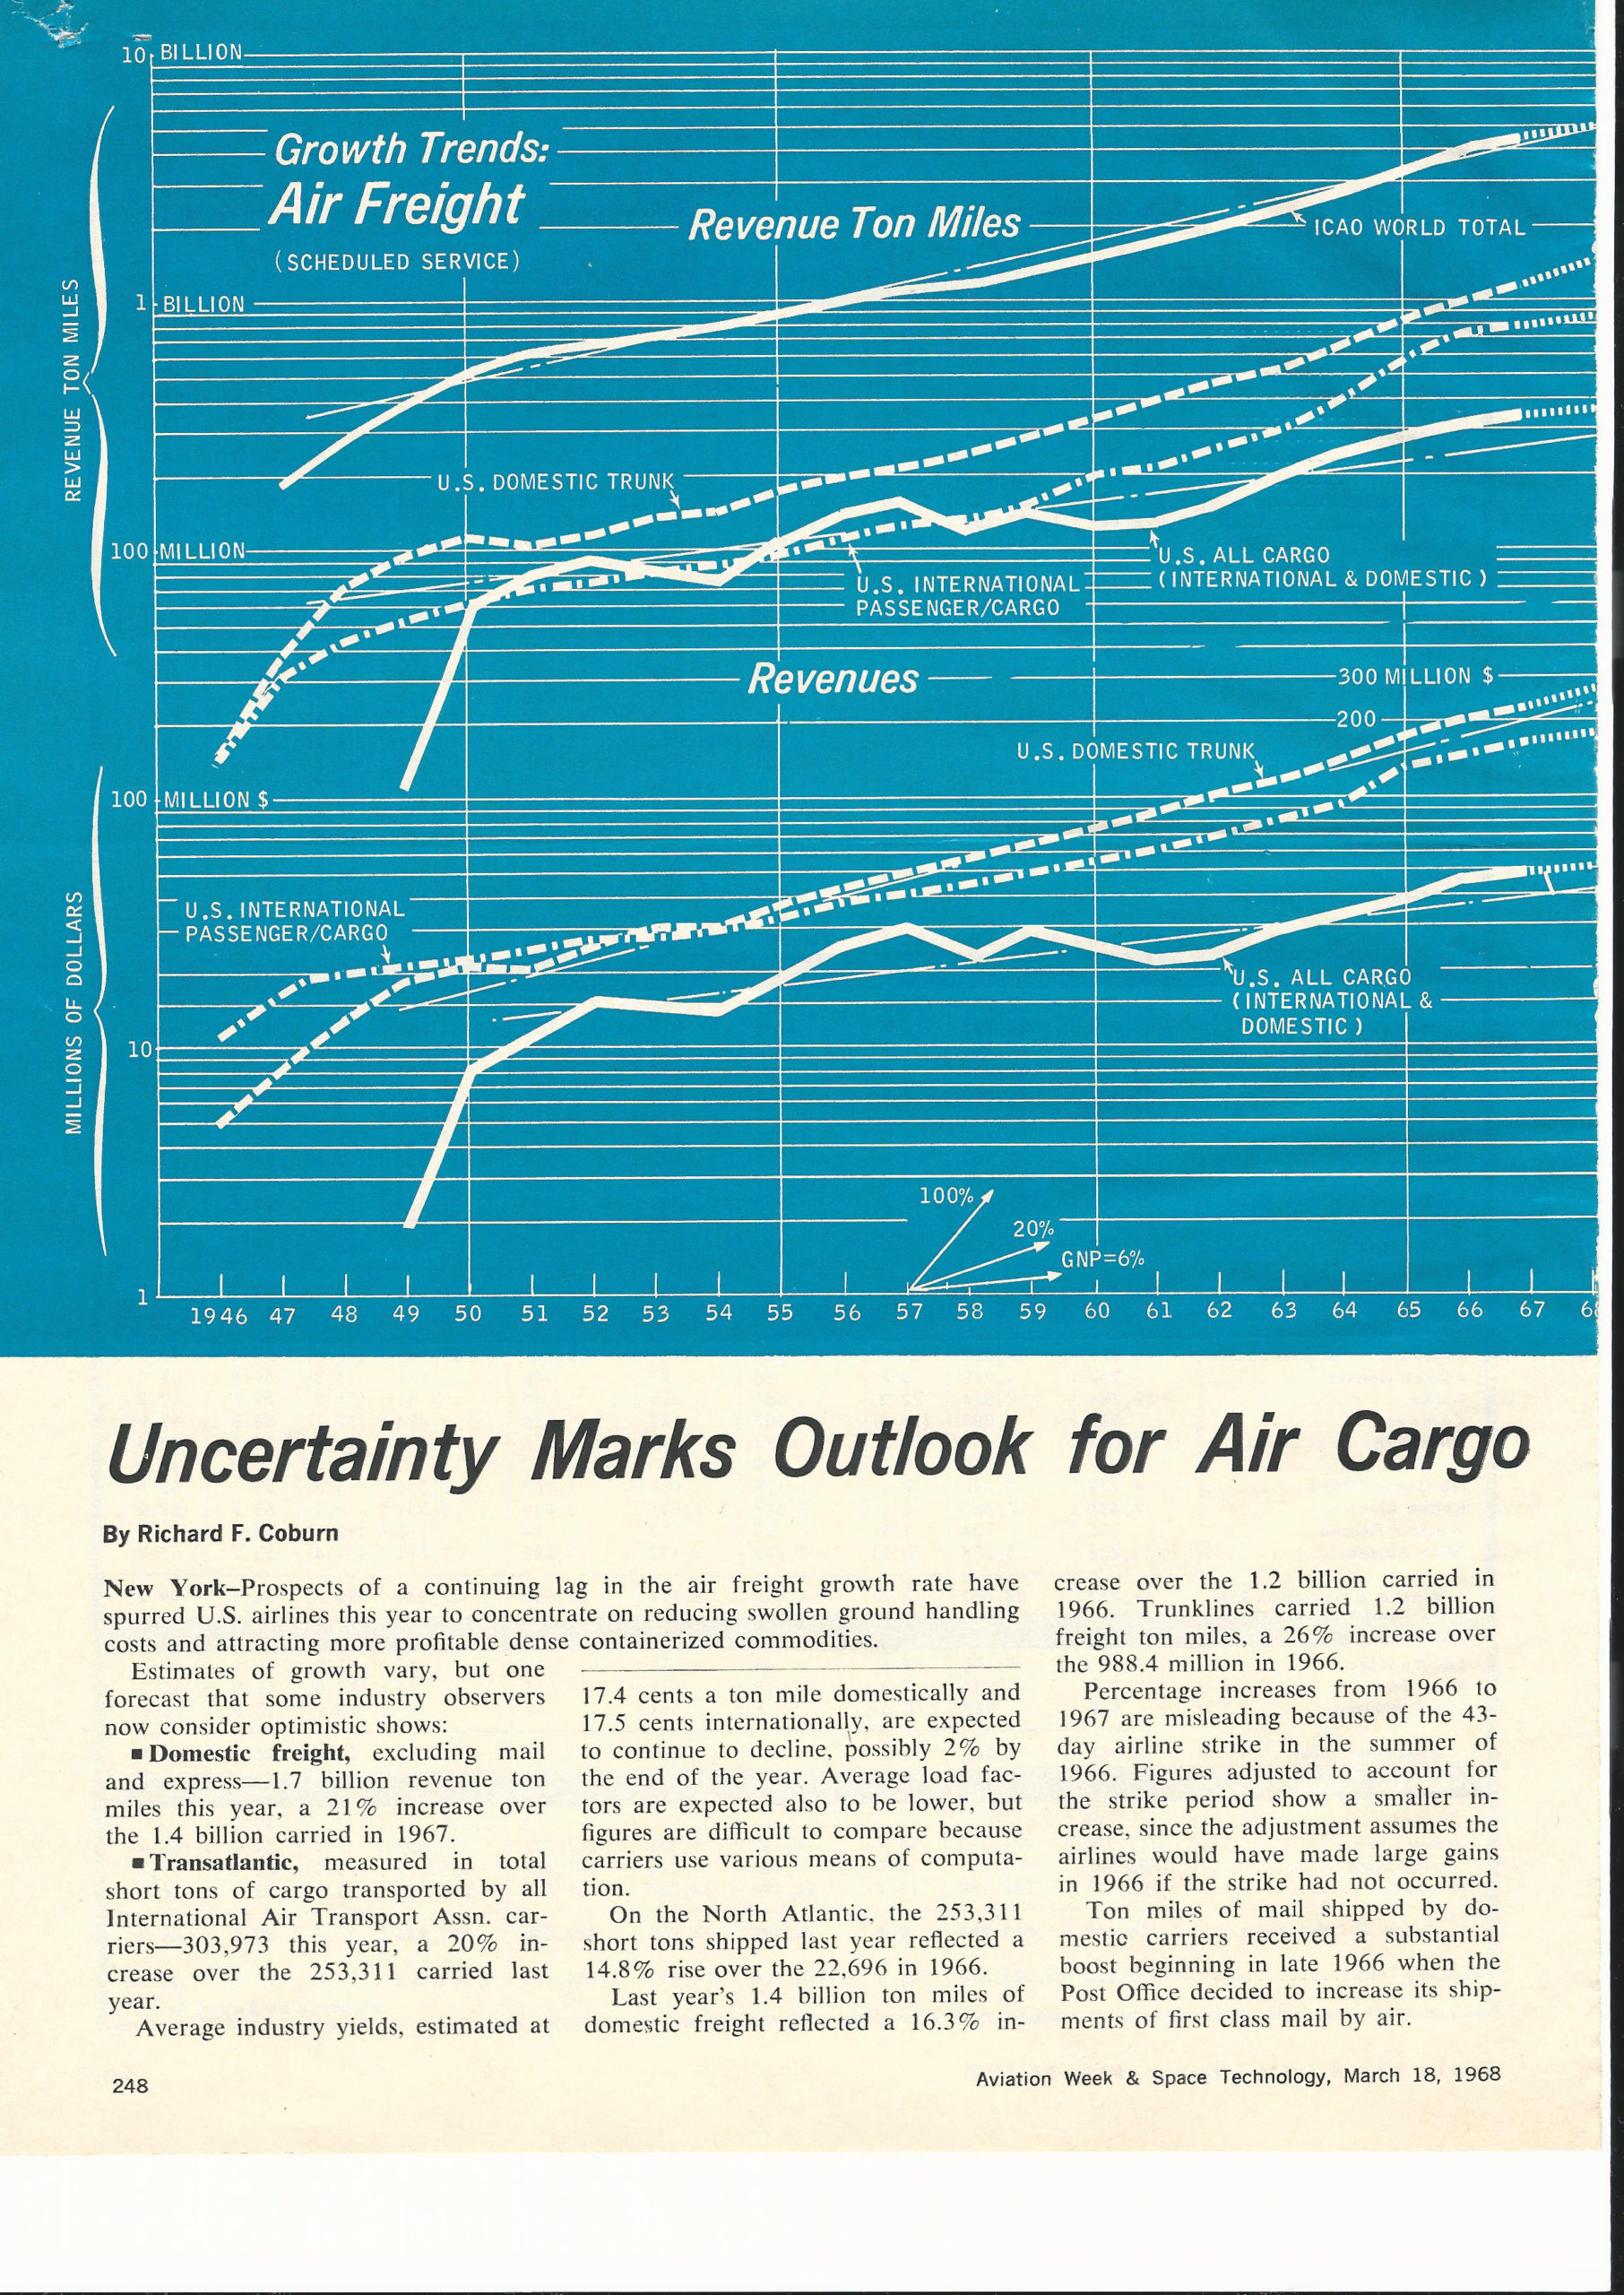 From Aviation Week, 1968